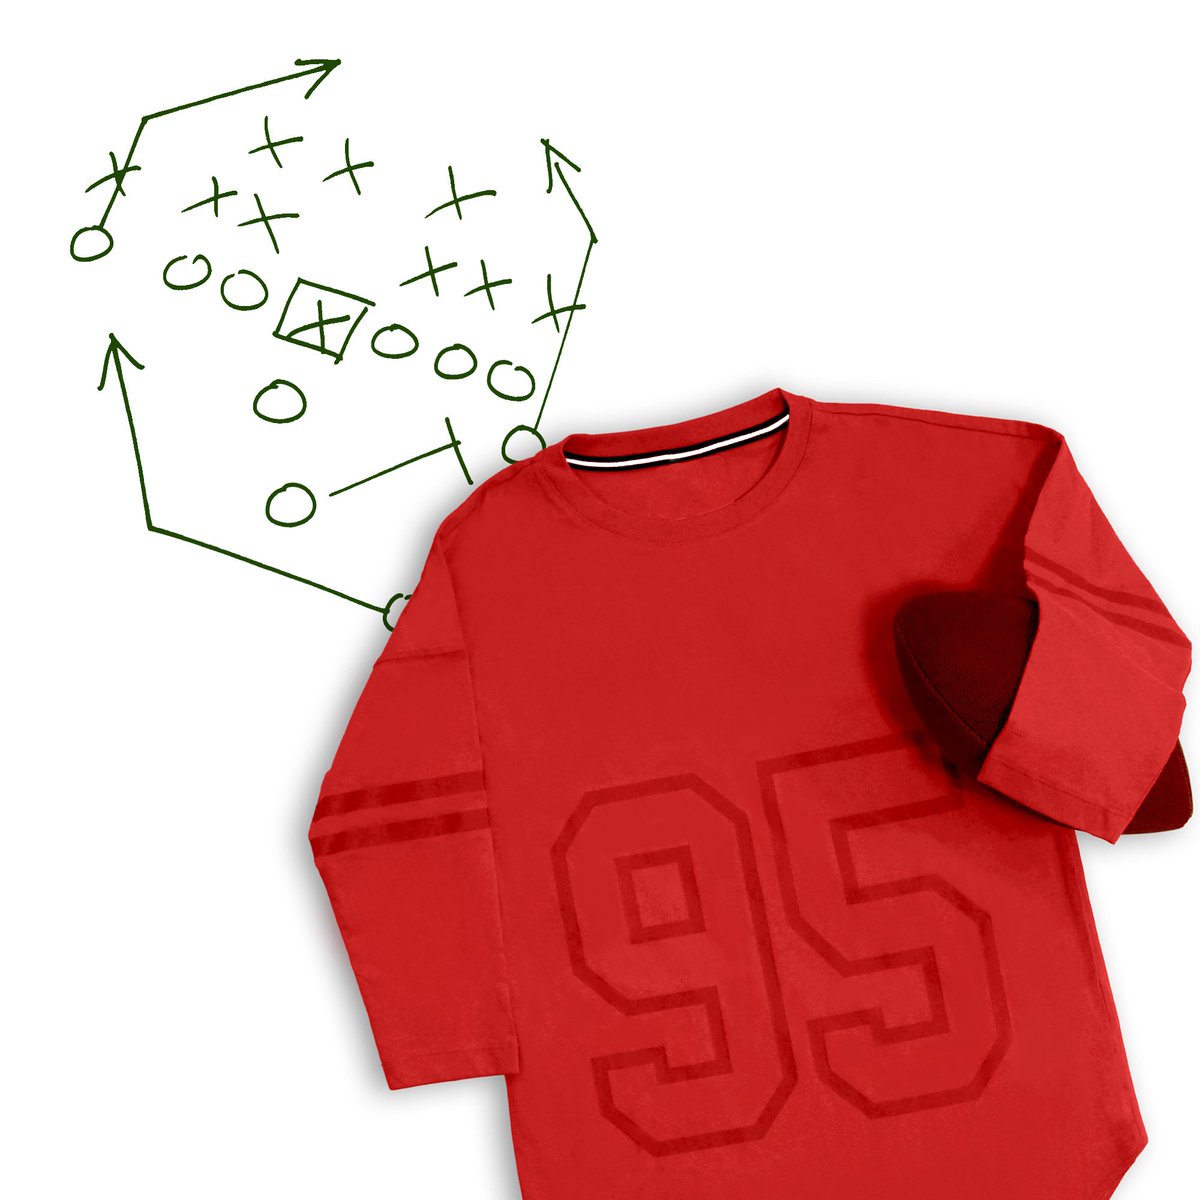 Game on! Shop now for attire suitable for any tailgating party. goo.gl/yOTcMS